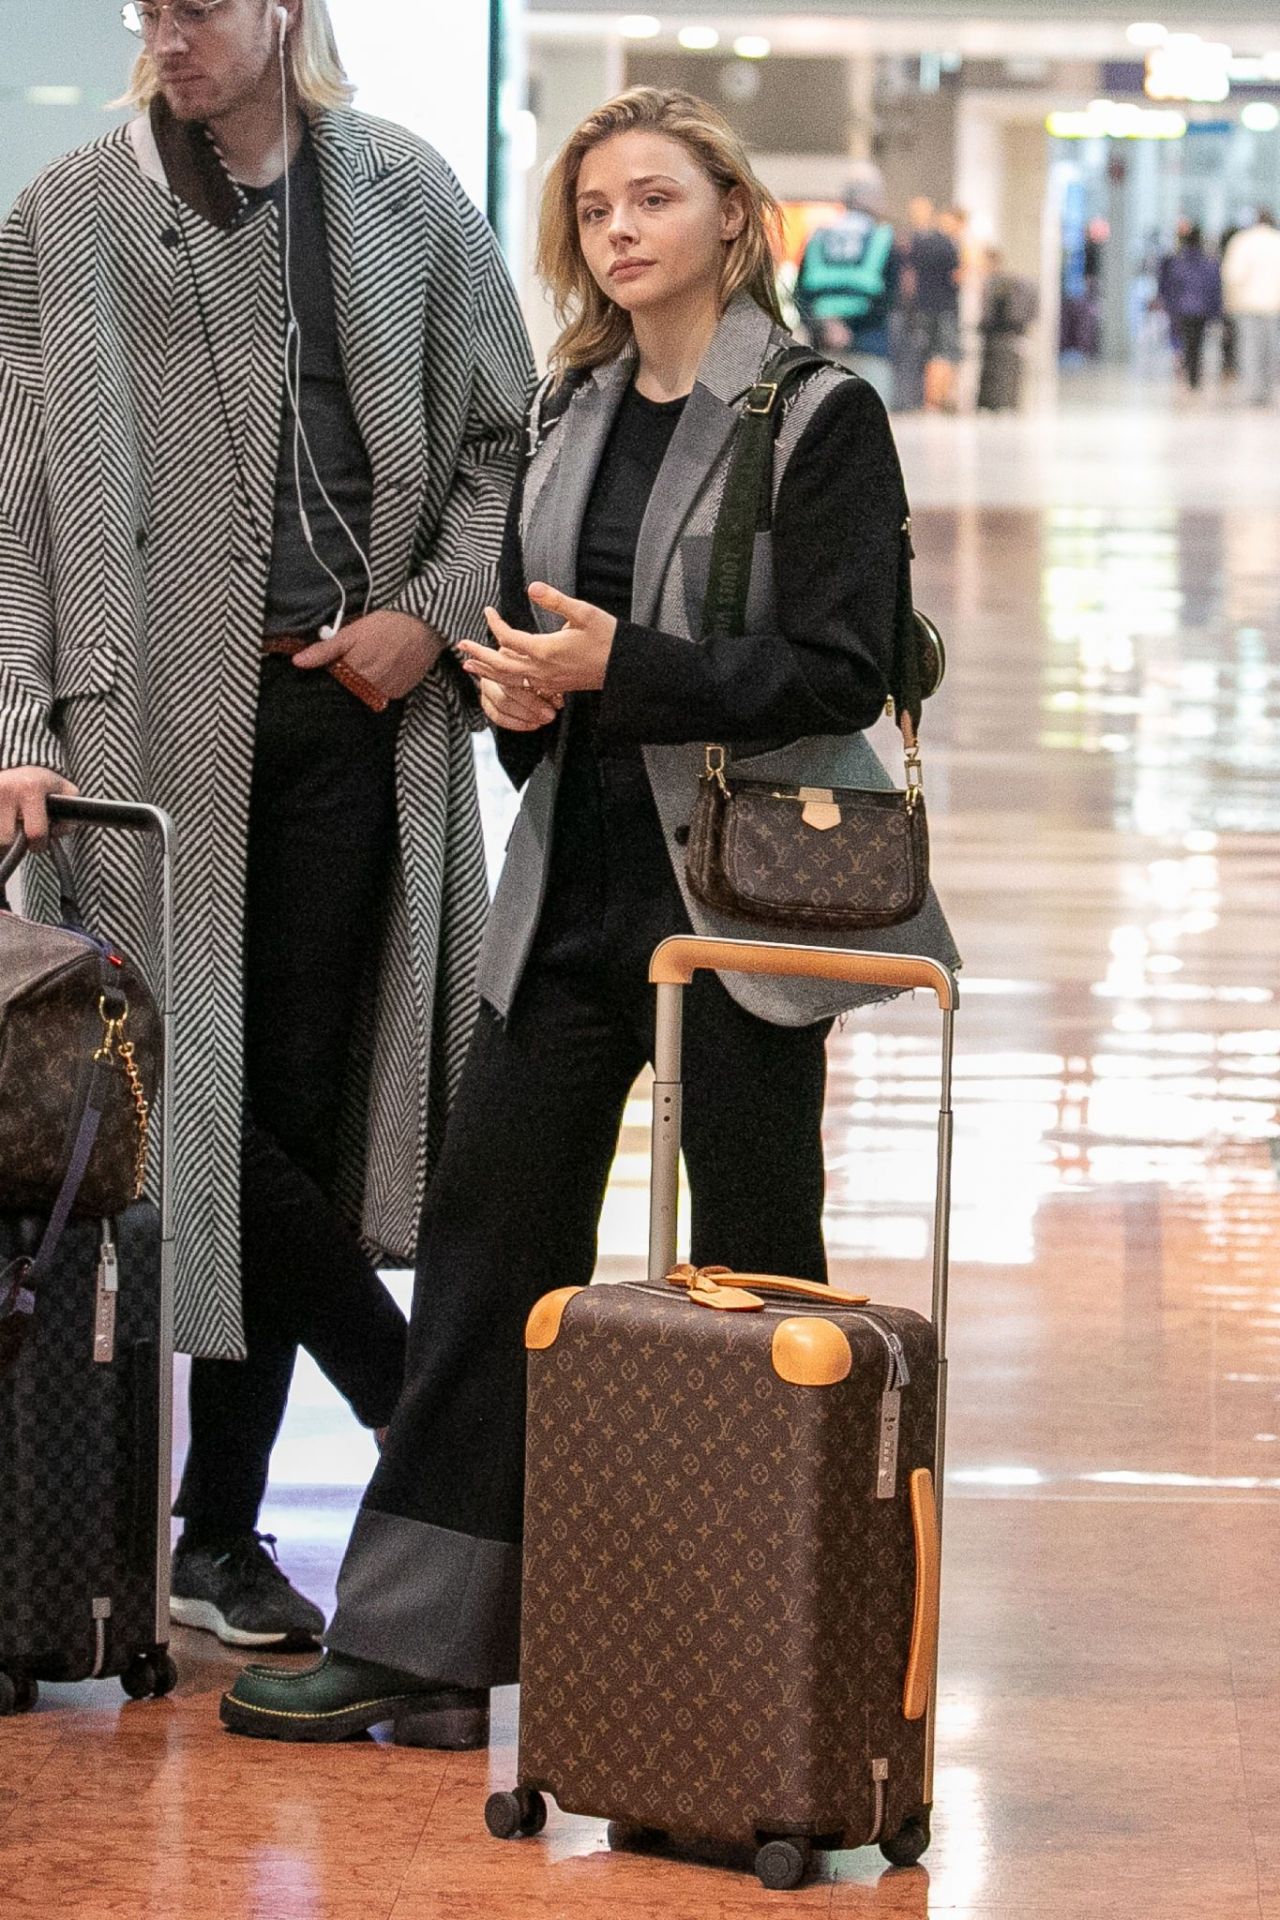 Chloe Moretz in Comfy Travel Outfit at Charles-de Gaulle Airport in Paris 09/29/2019